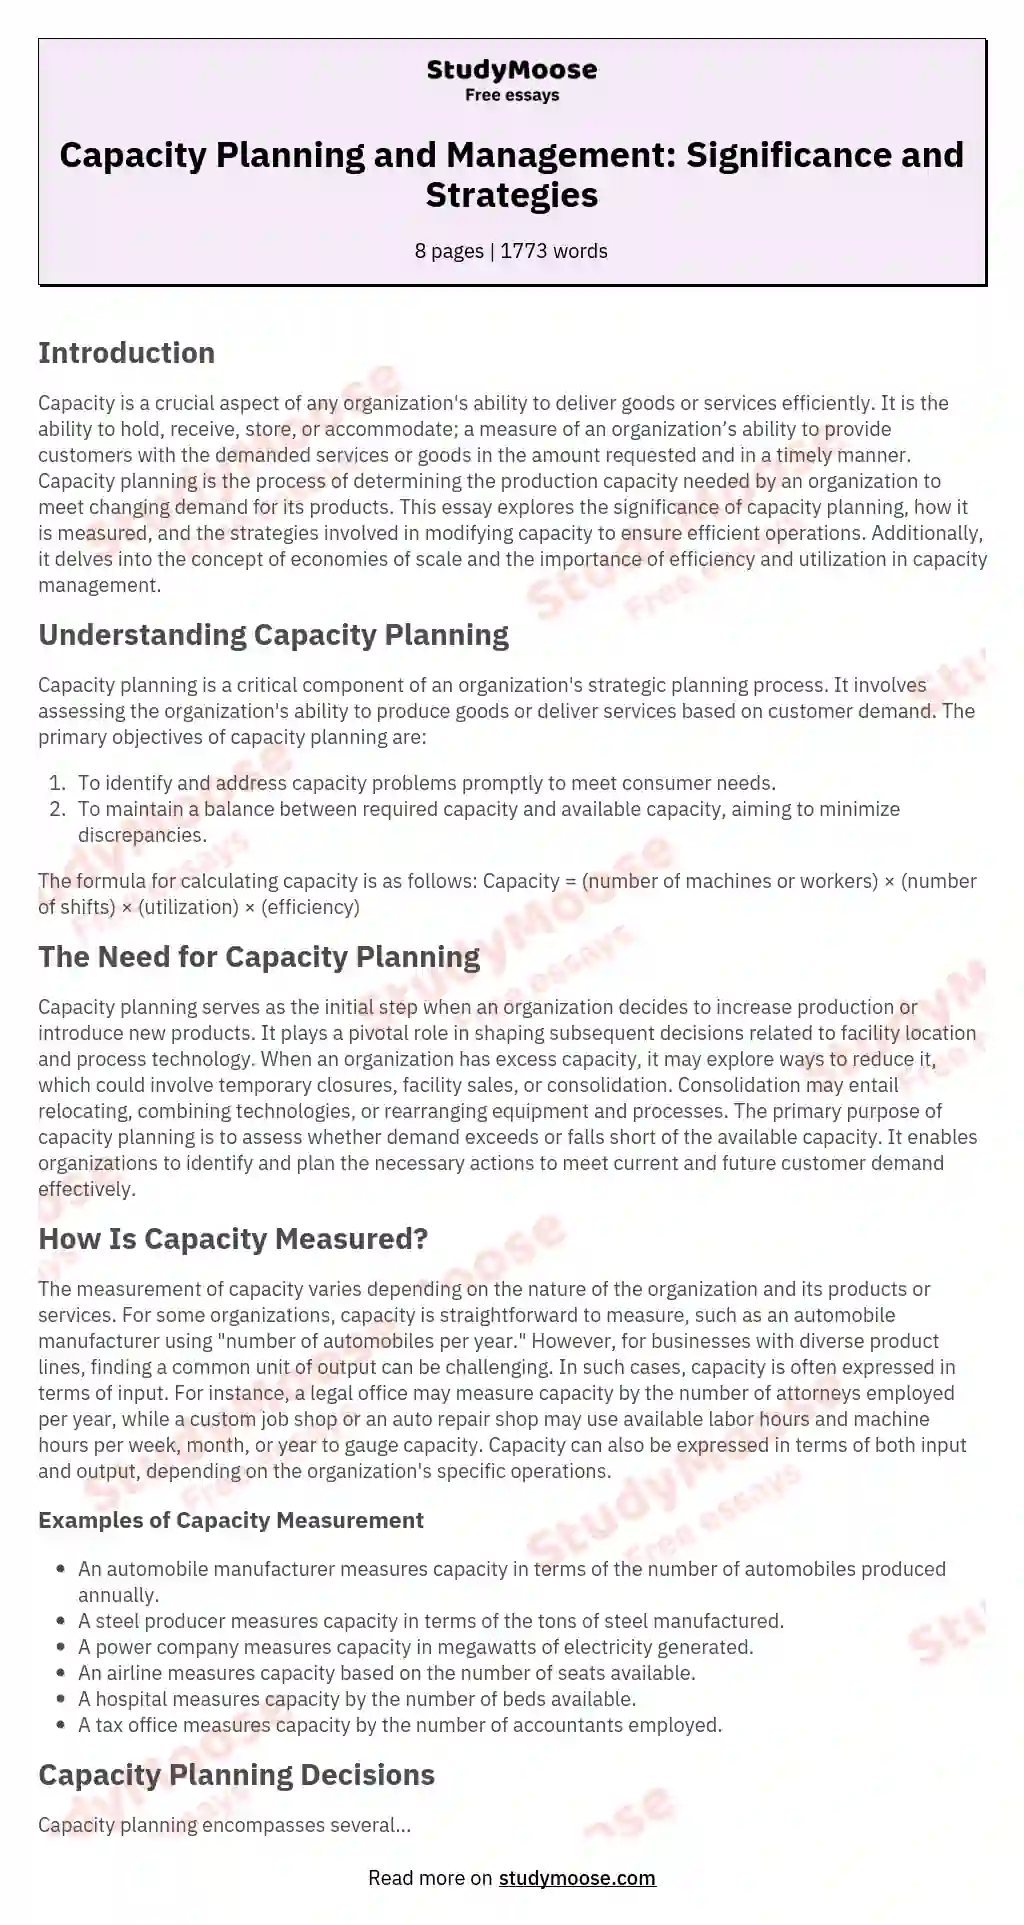 Capacity Planning and Management: Significance and Strategies essay